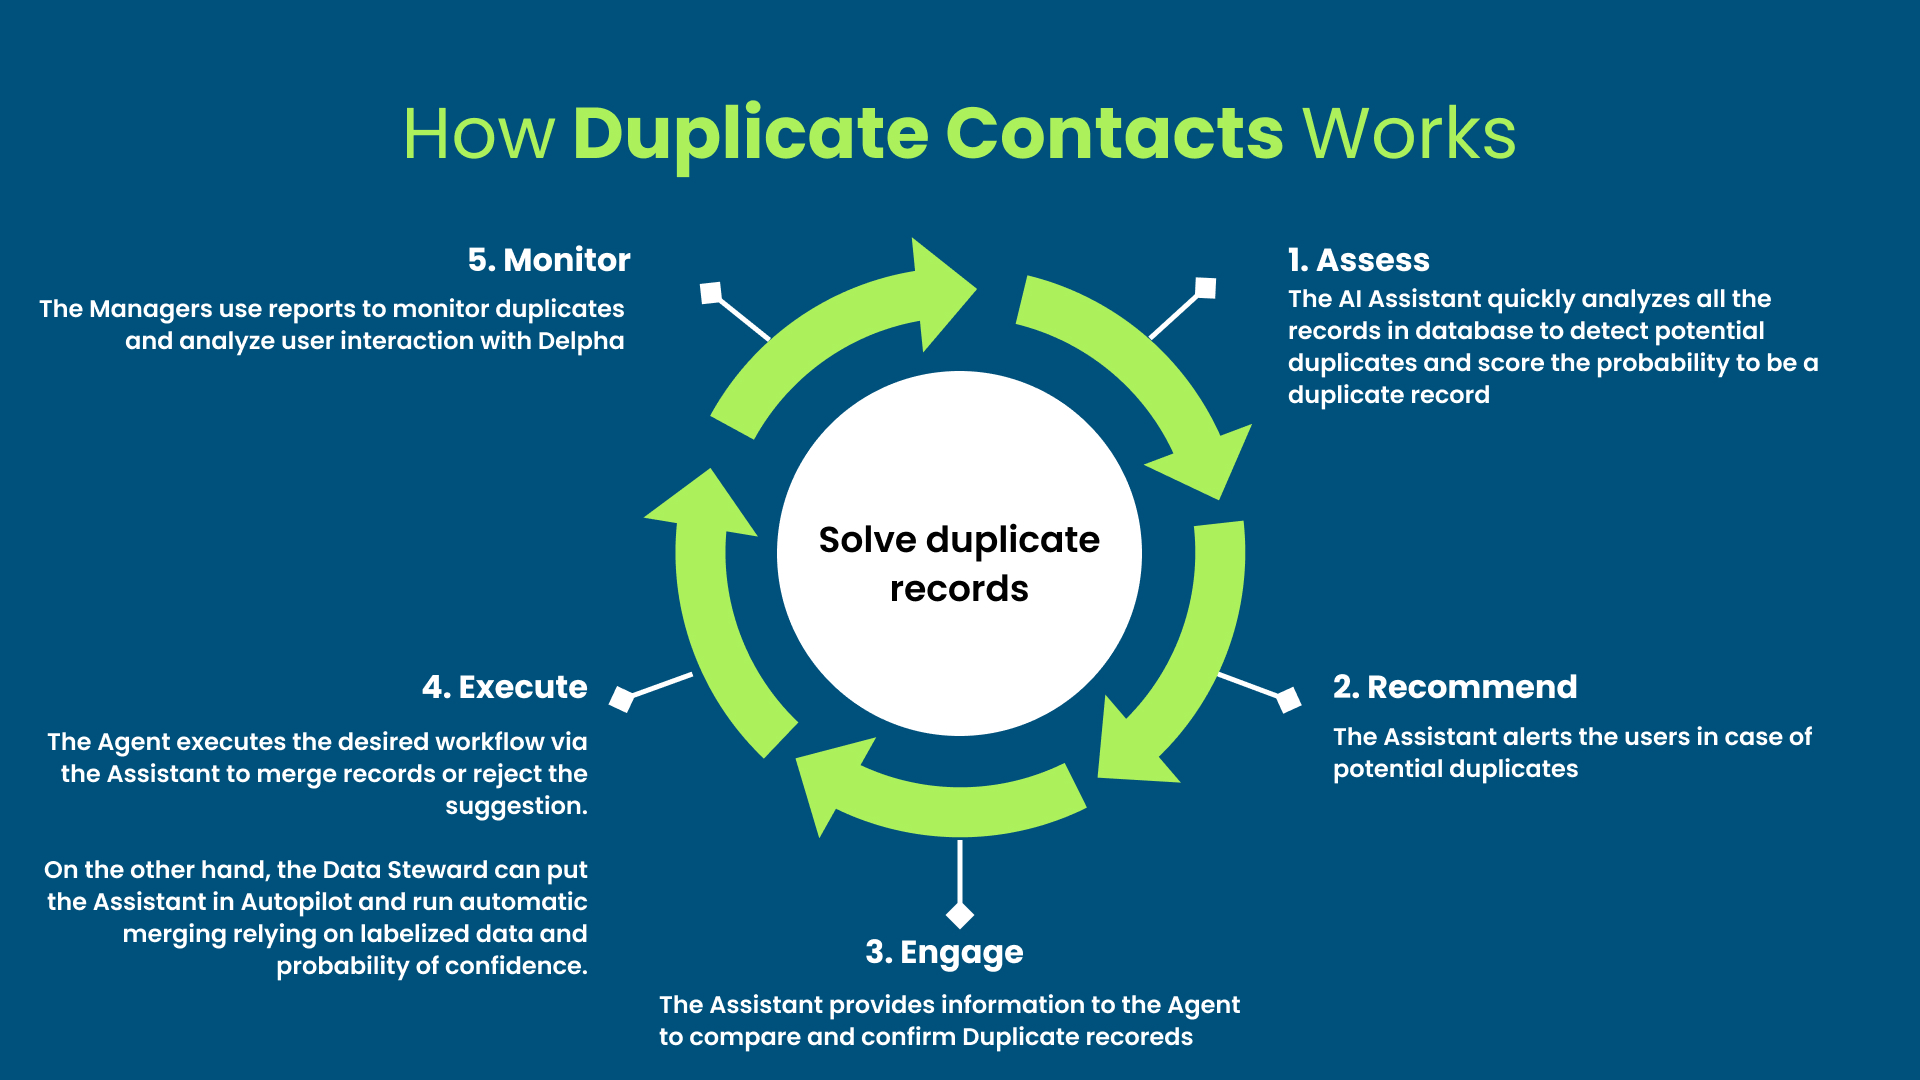 The Duplicate Contacts feature works by using AI for fast and accurate detection, synthesizes actionable insights, recommends merge or rejection solutions, collects feedback from user decision (feedback loop) and works in real-time for minimal disruption.